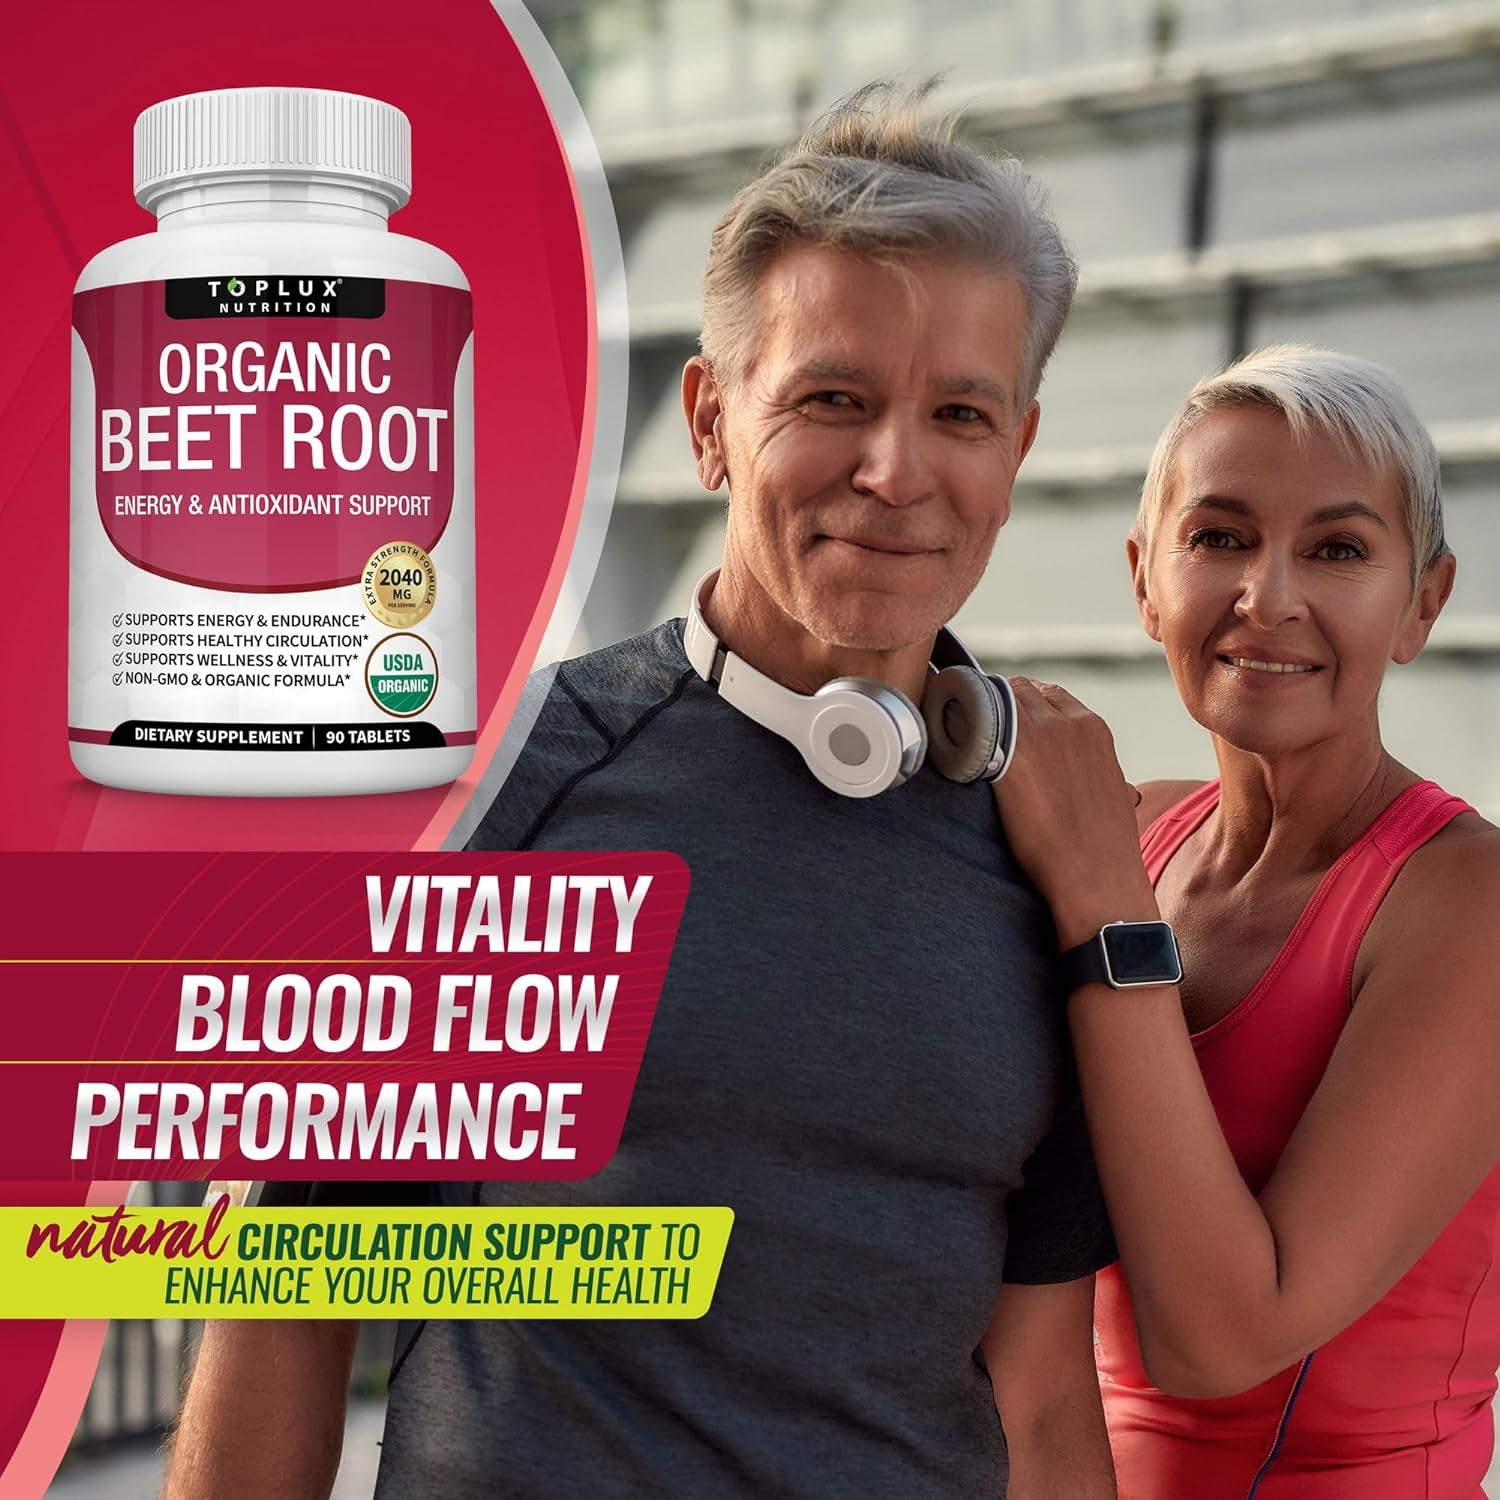 Organic Beet Root Powder Tablets - 2040Mg Natural Nitric Oxide Beets to Support, Energy, Black Pepper Better Absorption, Non-Gmo, for Men Women, 90 Tablets